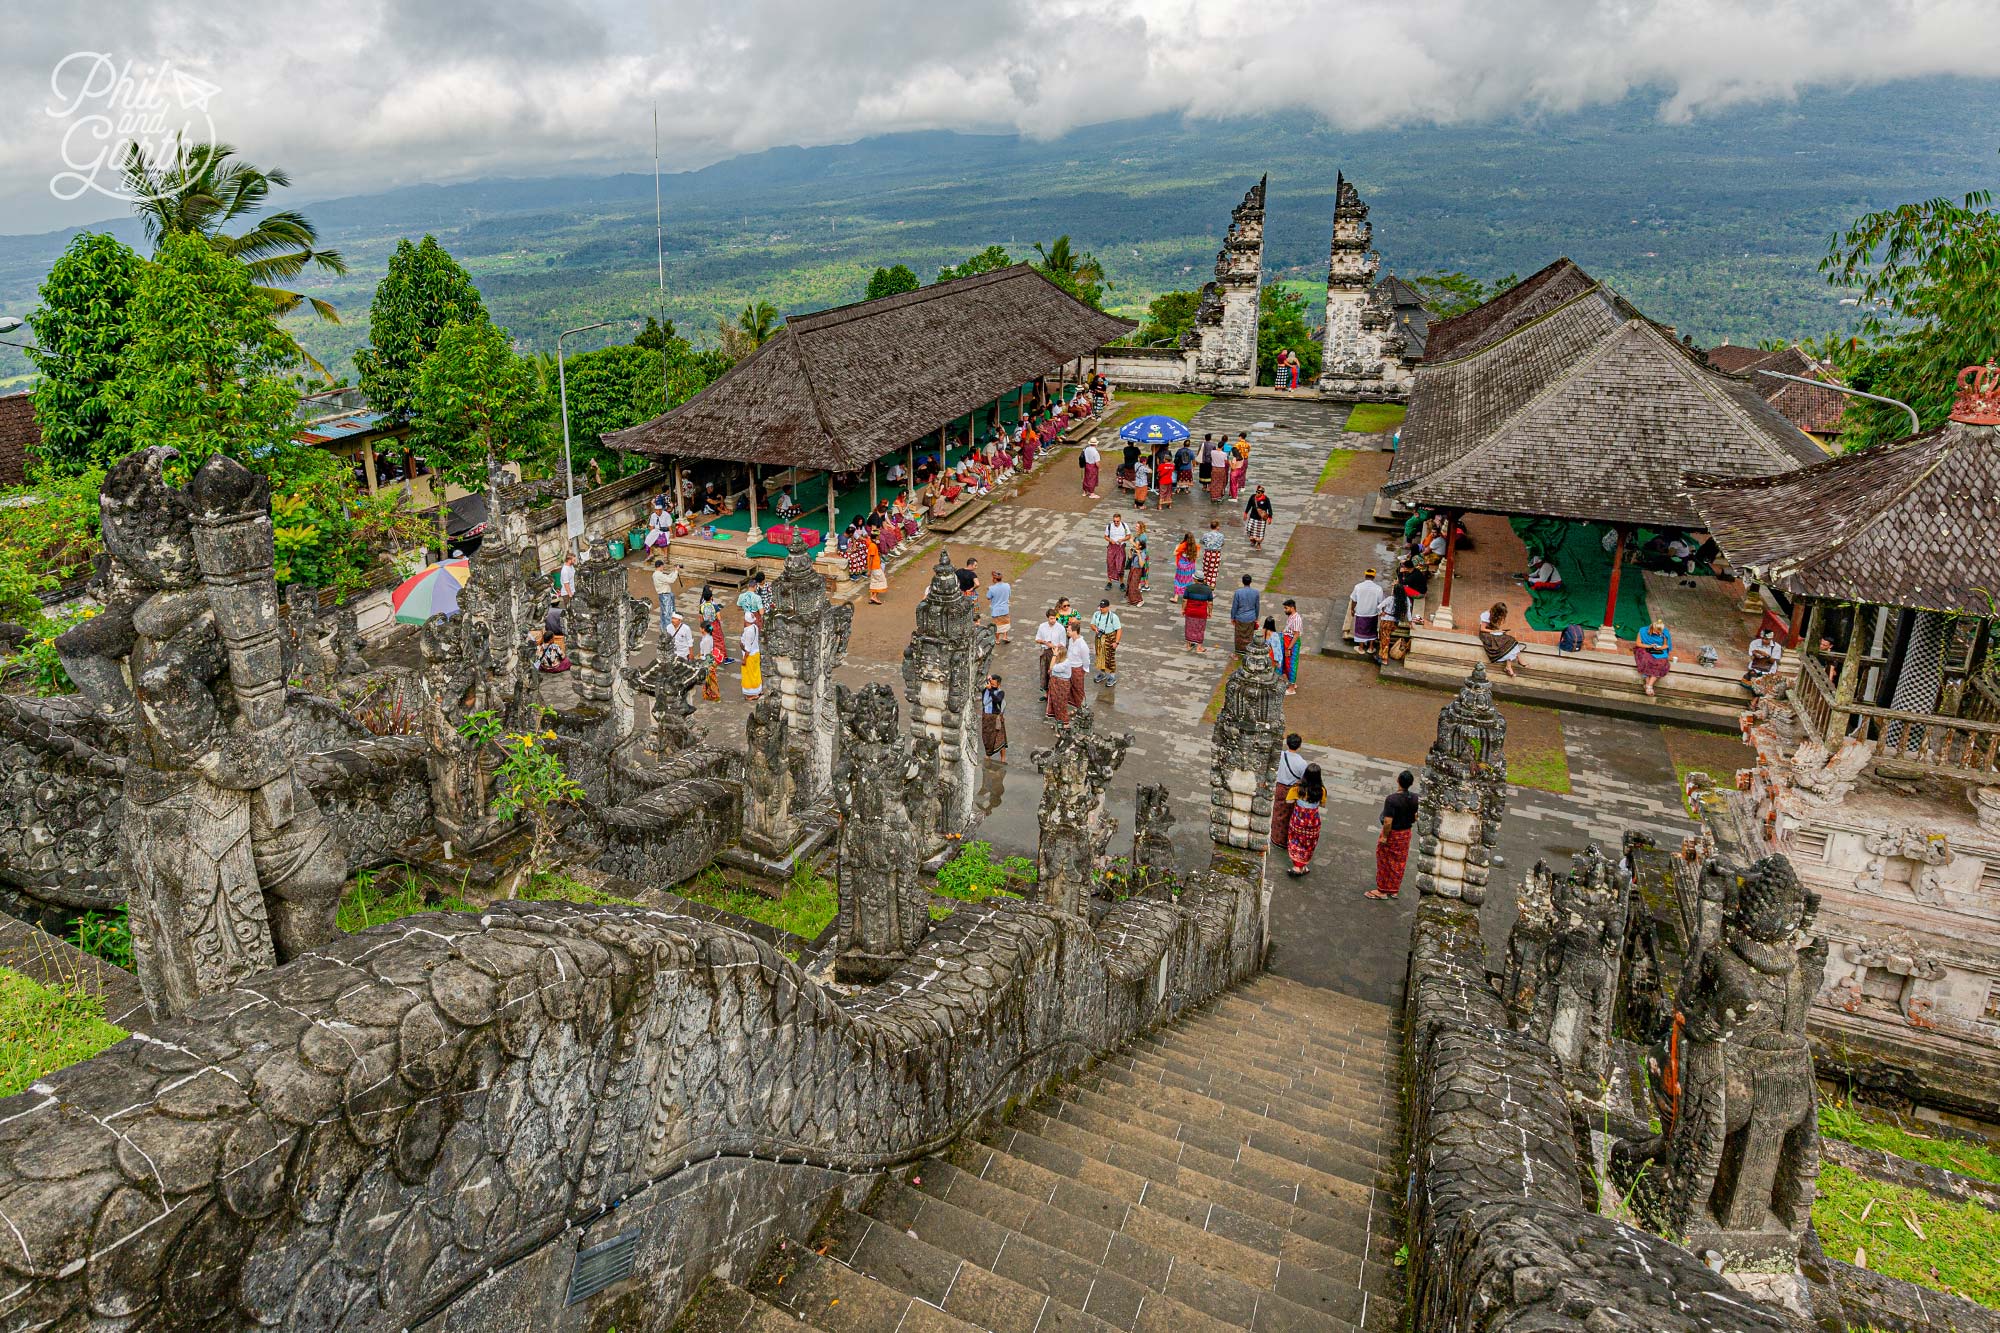 Lempuyang Temple is in a remote location in East Bali, 2.5 hours from Ubud